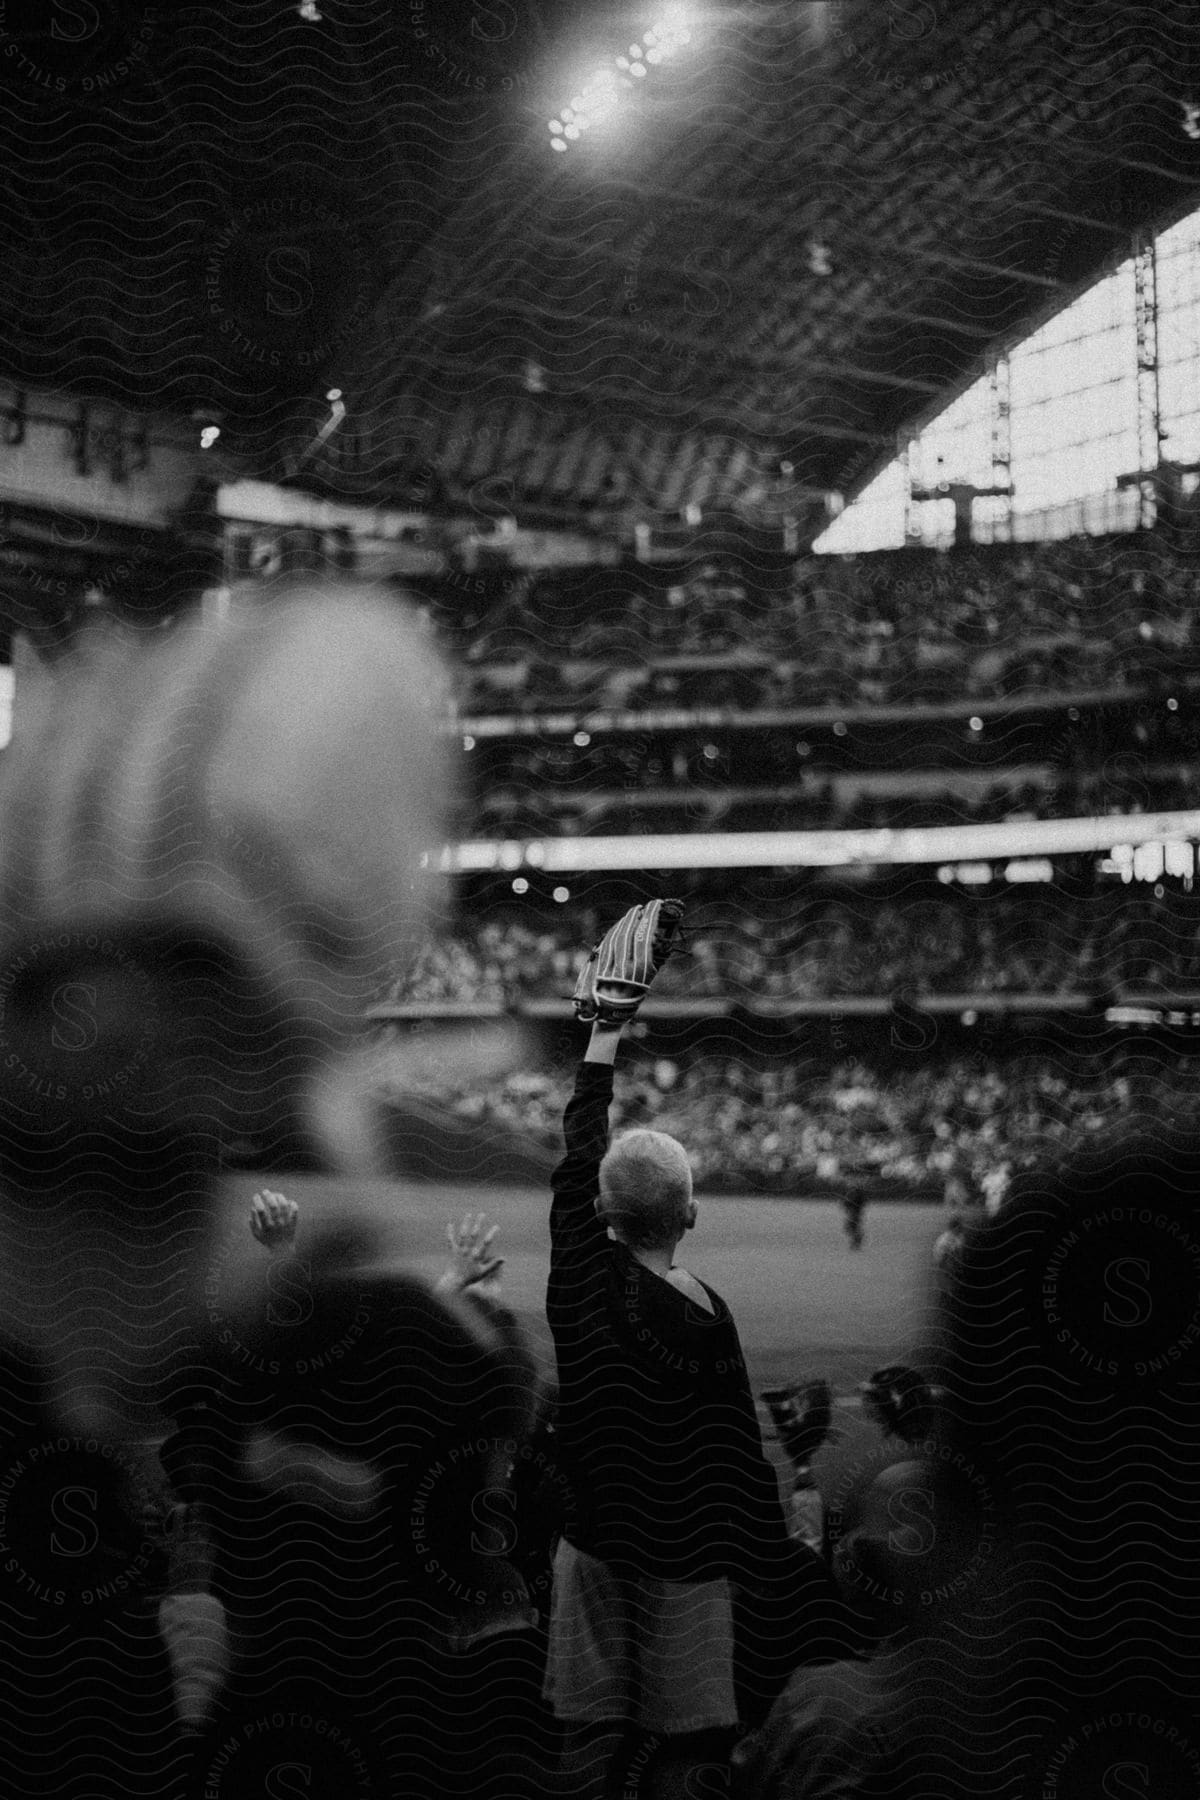 A young boy holds a baseball glove in a crowded baseball stadium